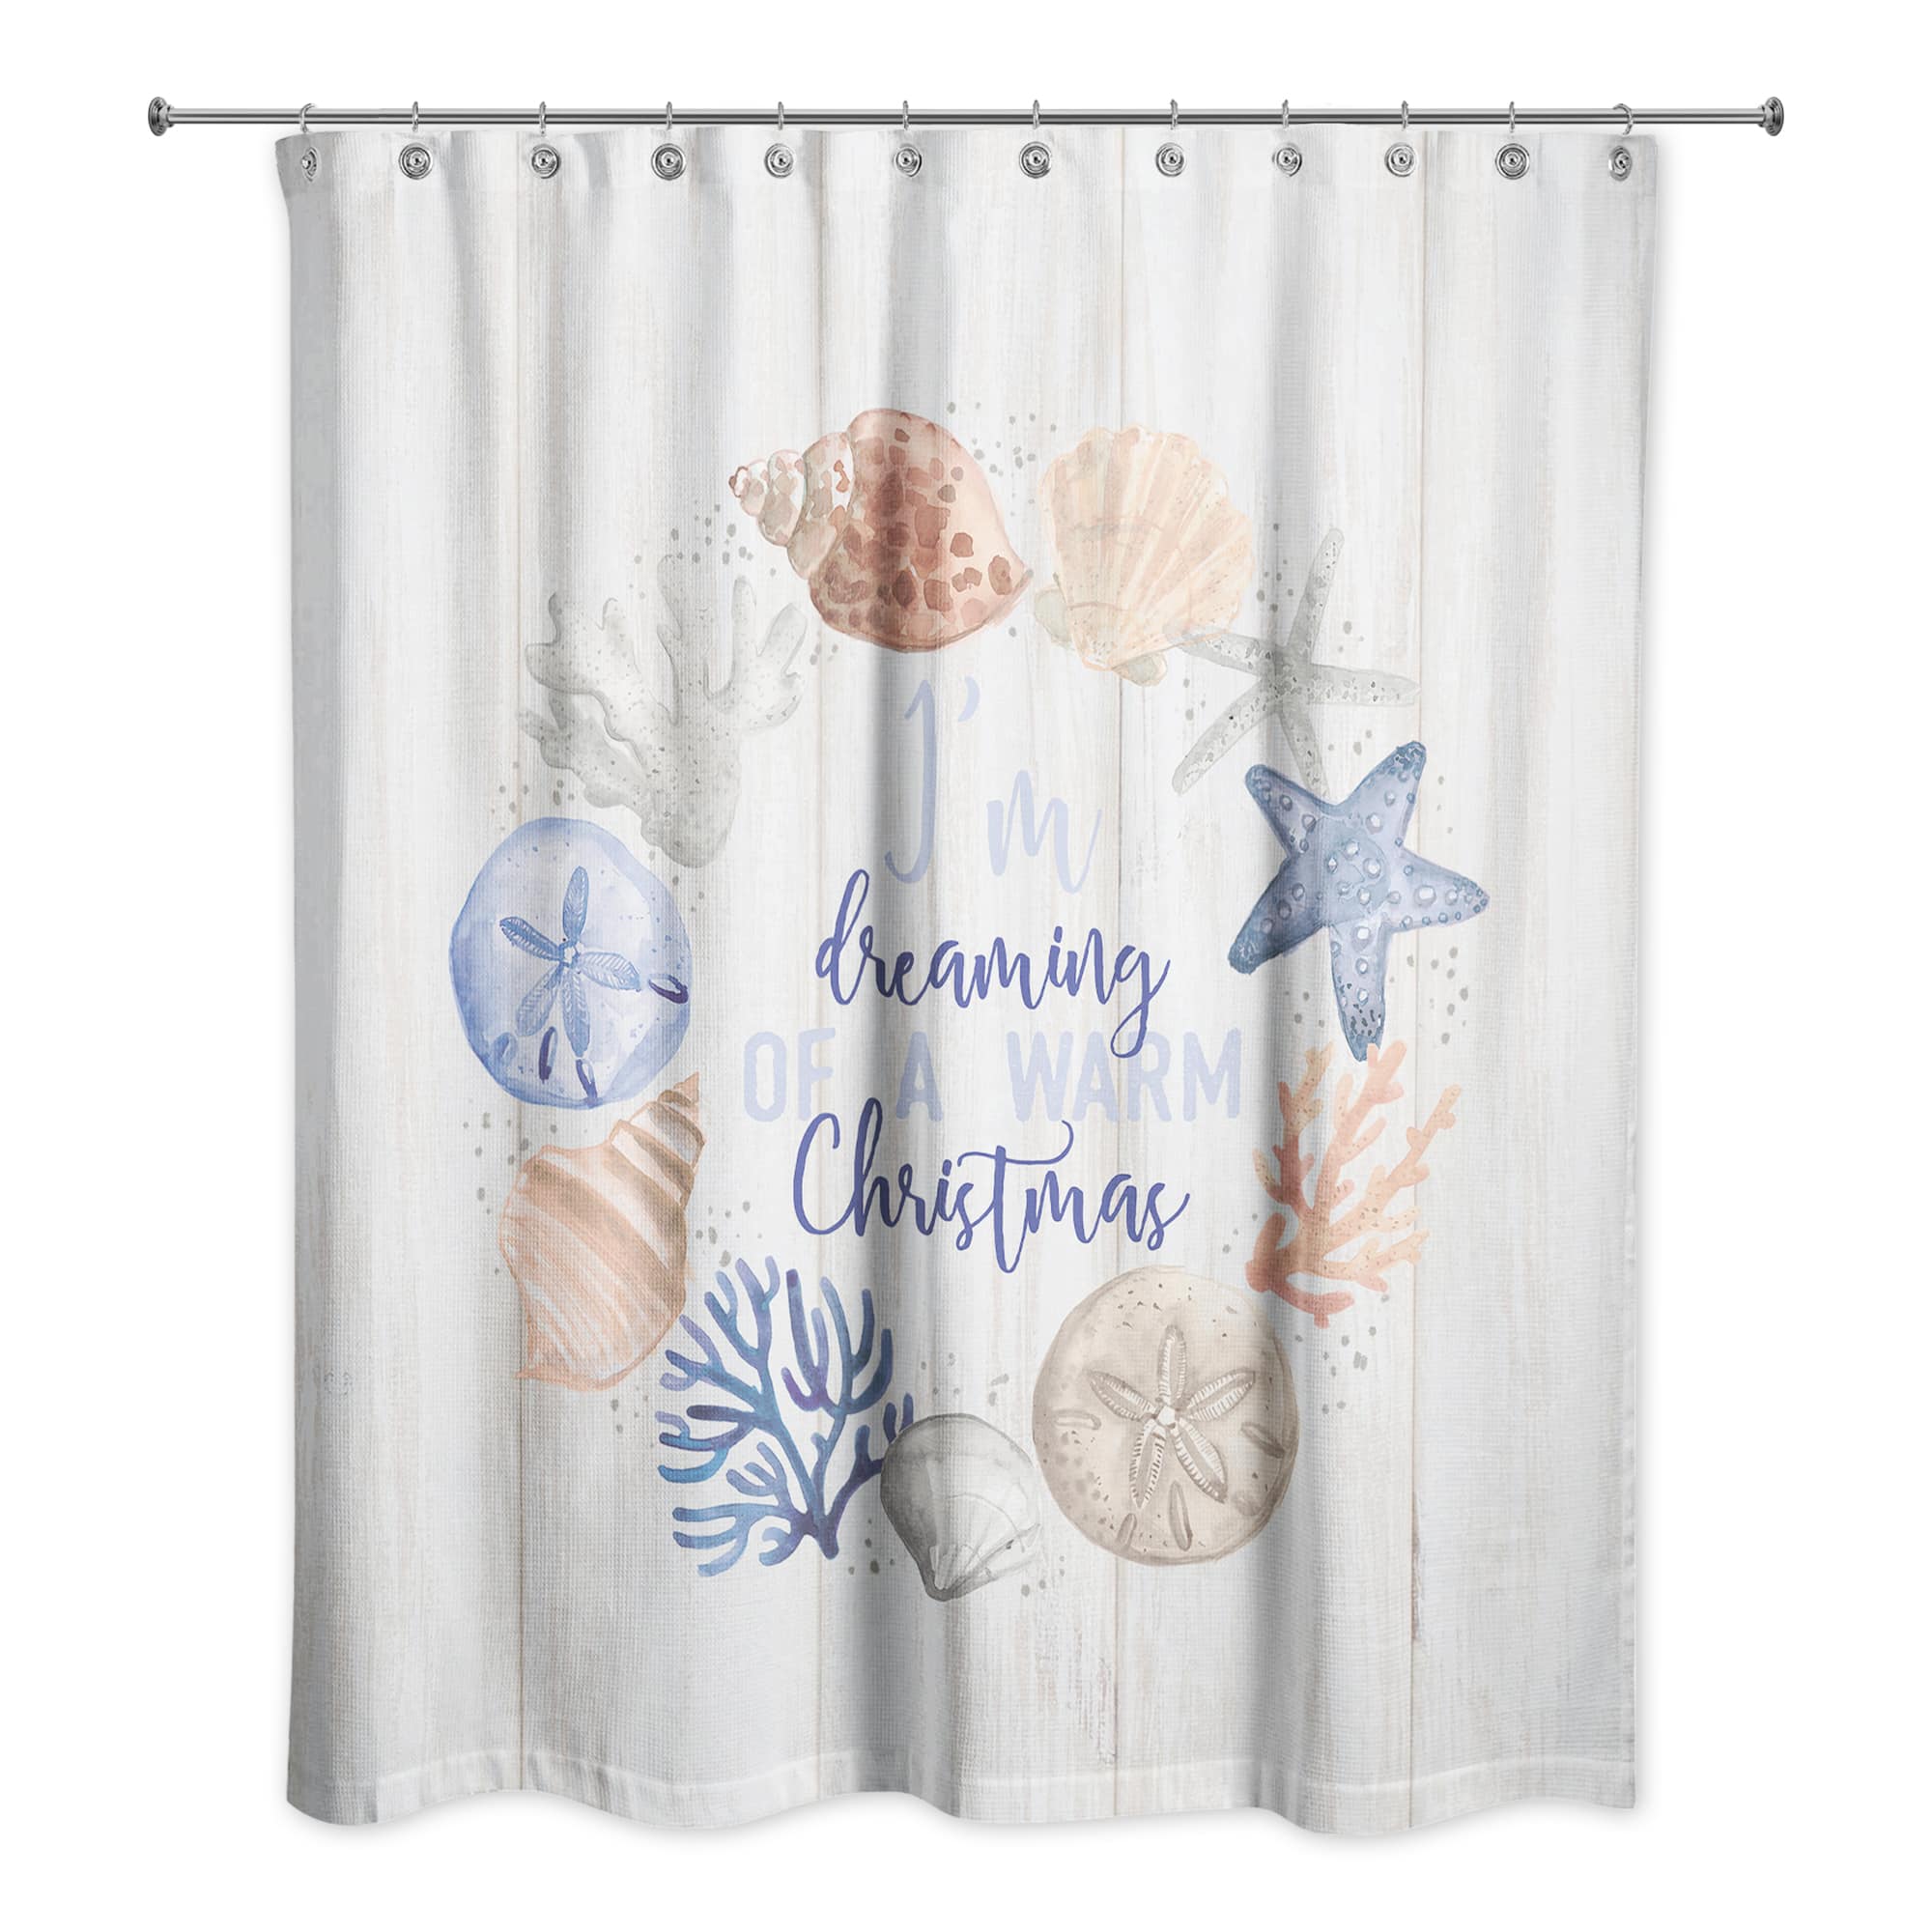 Dreaming of a Warm Christmas Fabric Shower Curtain